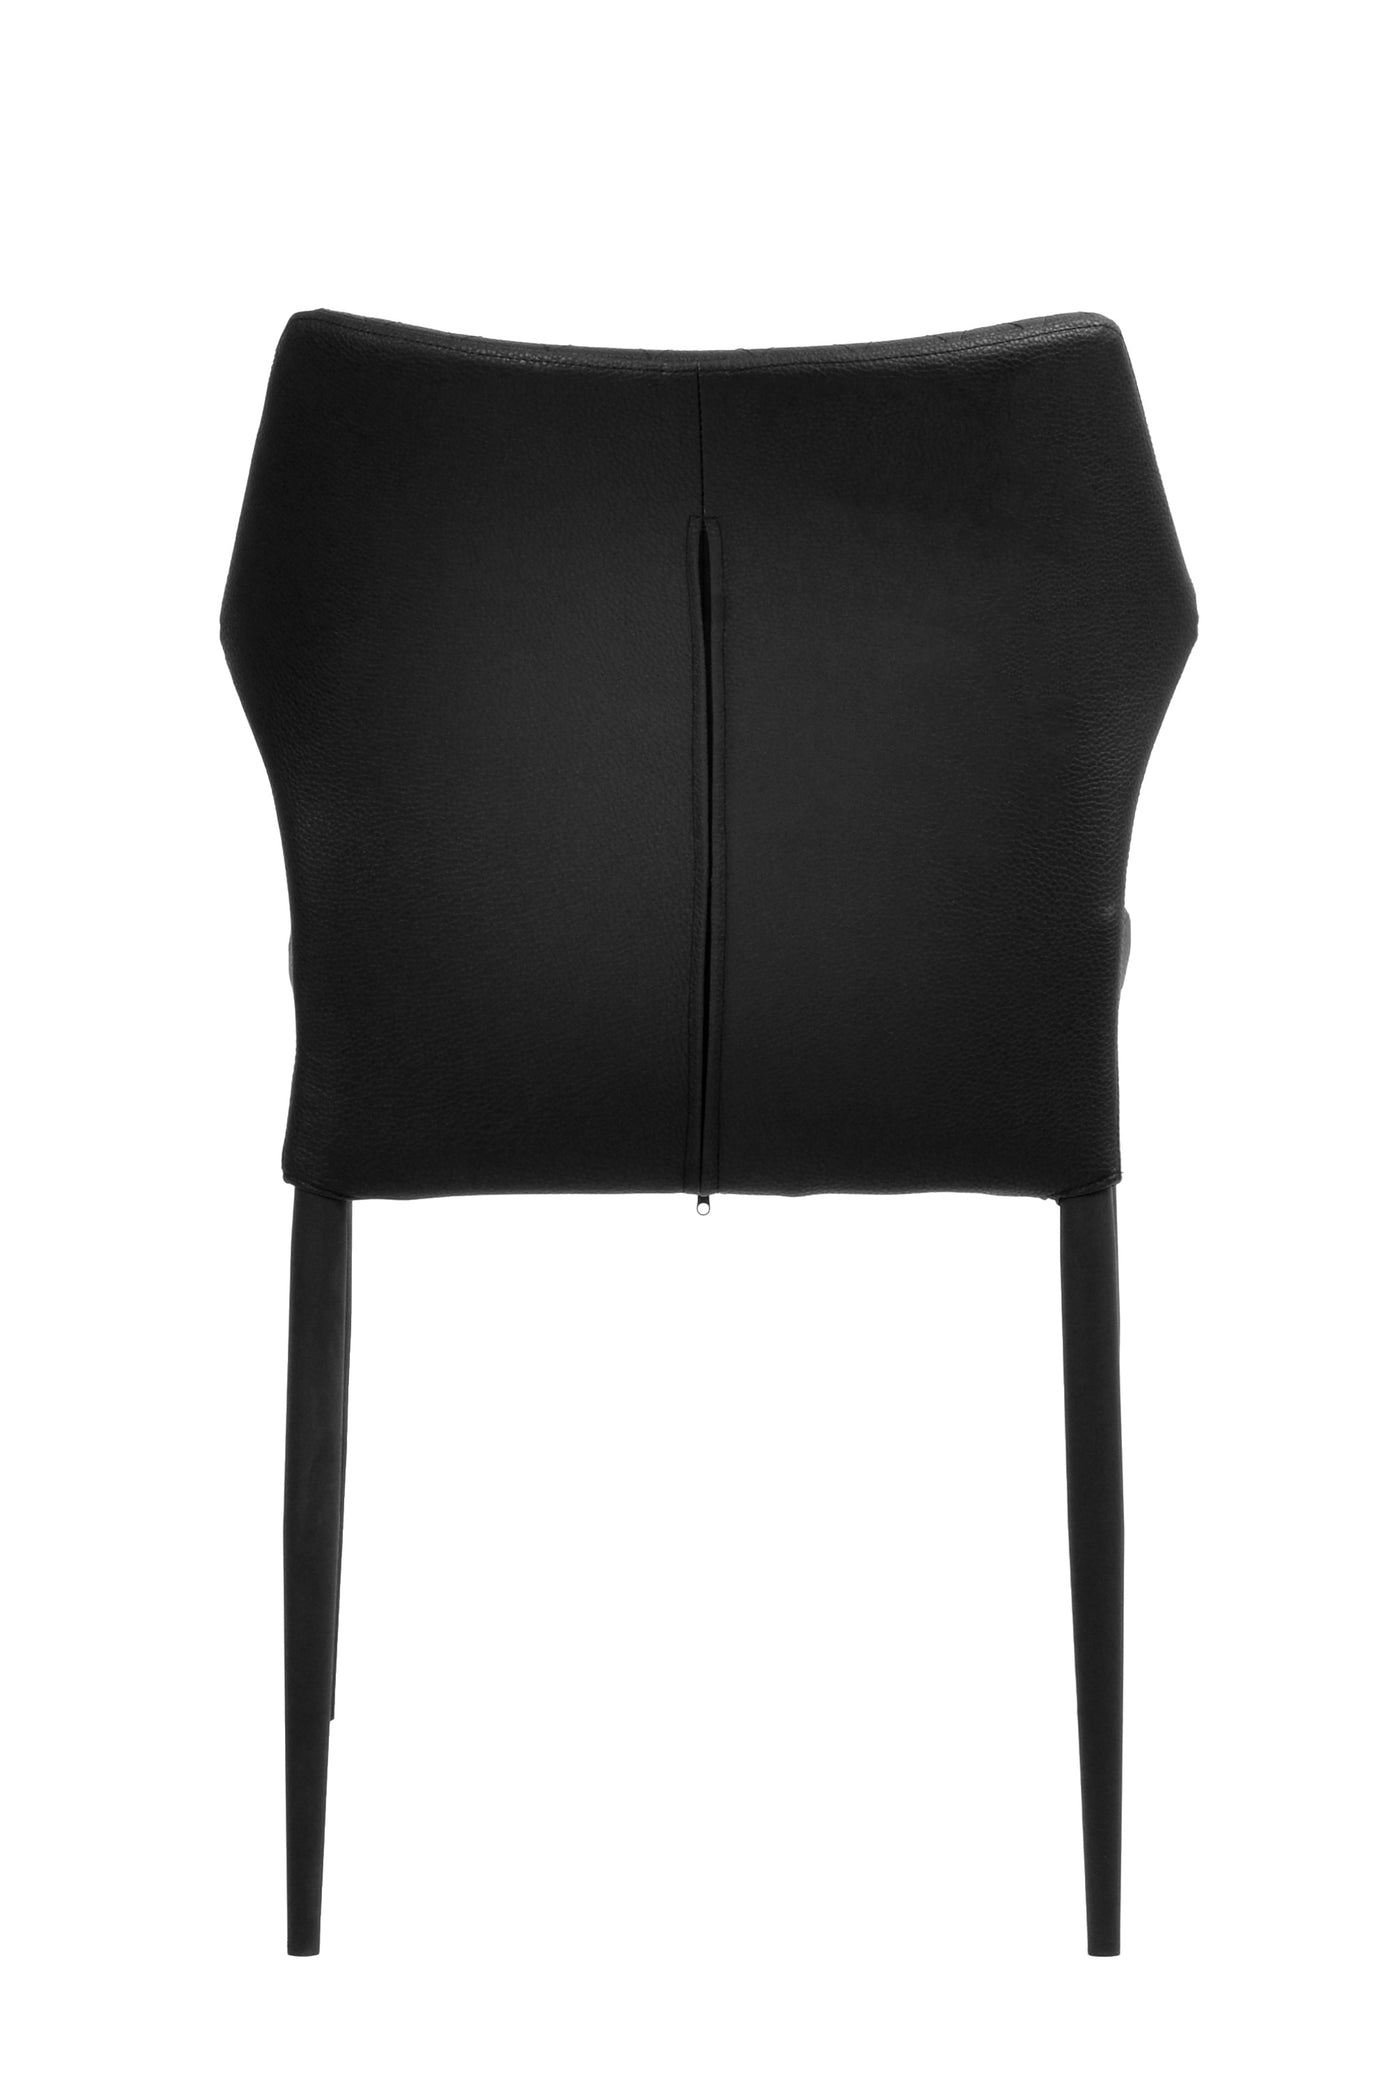 Camilla Dining Chair Black Leather Look